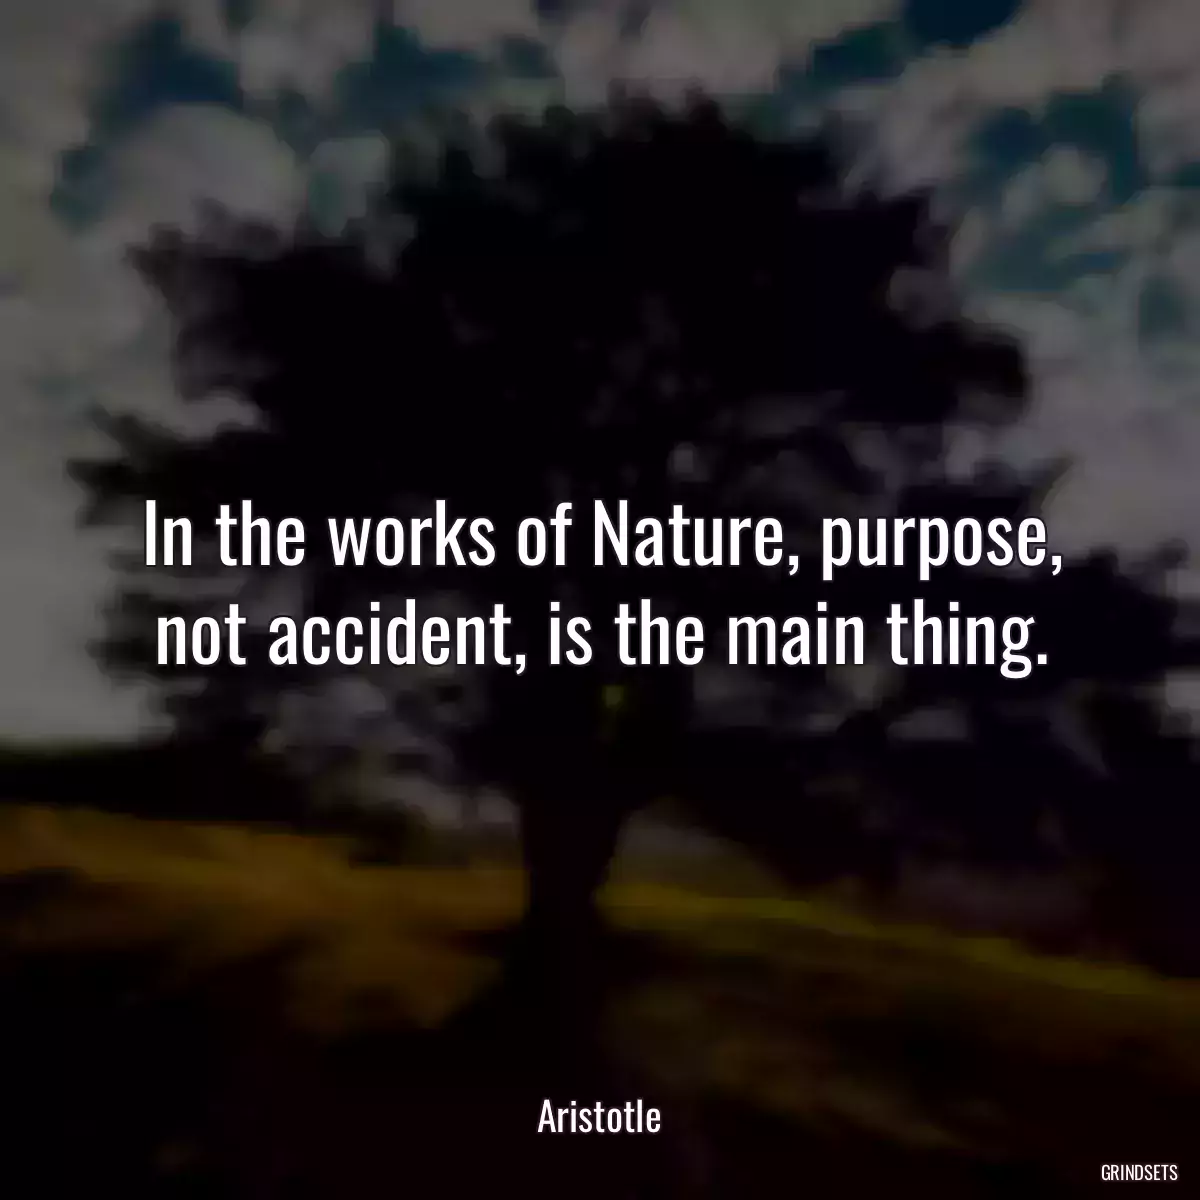 In the works of Nature, purpose, not accident, is the main thing.